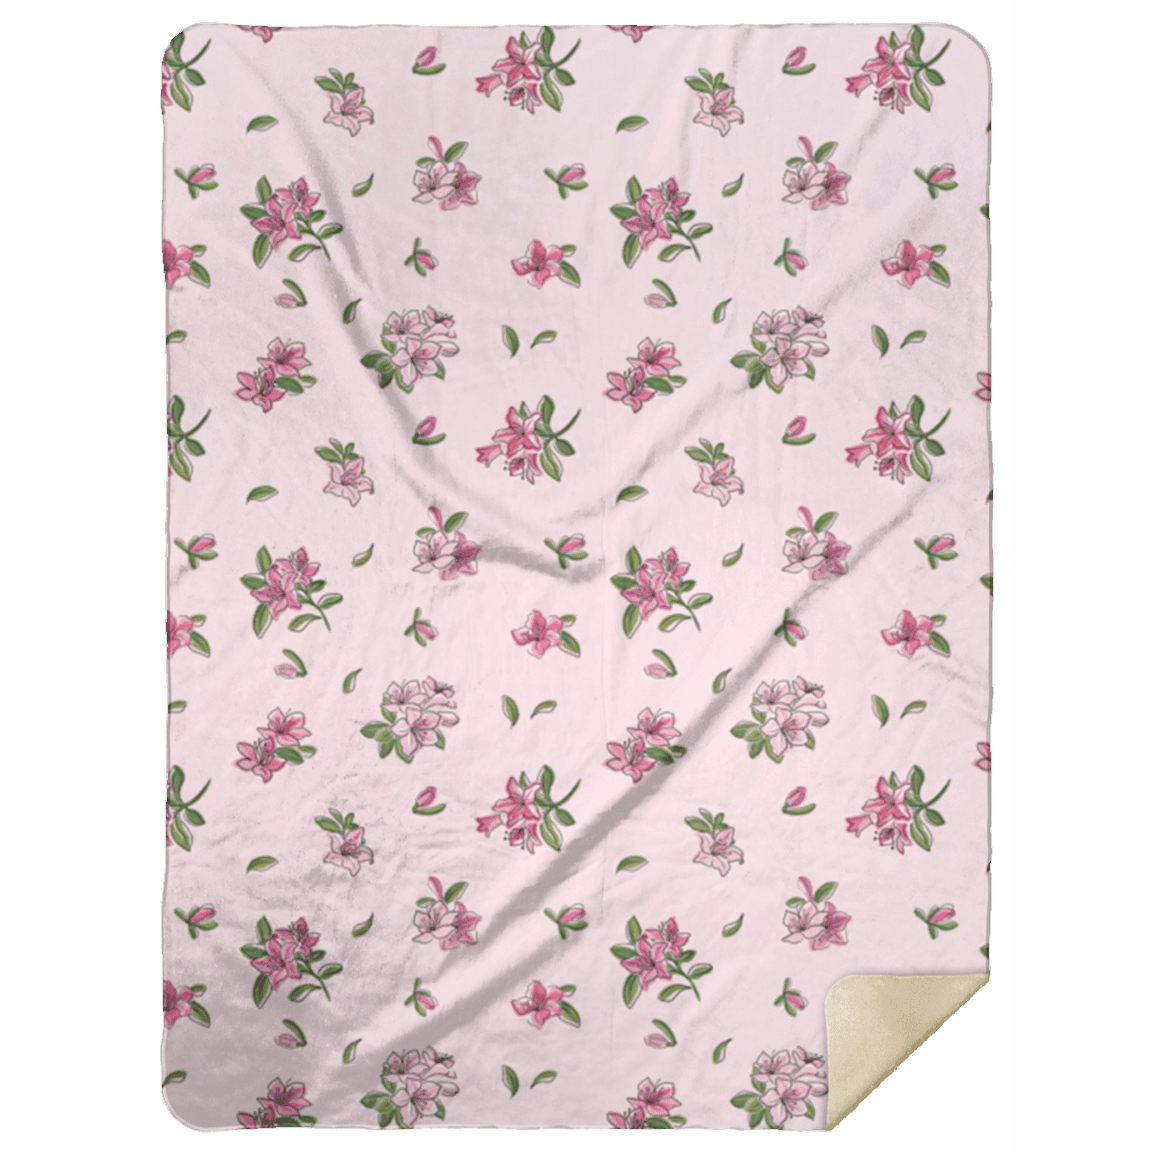 Soft, pastel-colored plush throw blanket with azalea flower pattern, 60x80 inches, by Little Hometown.